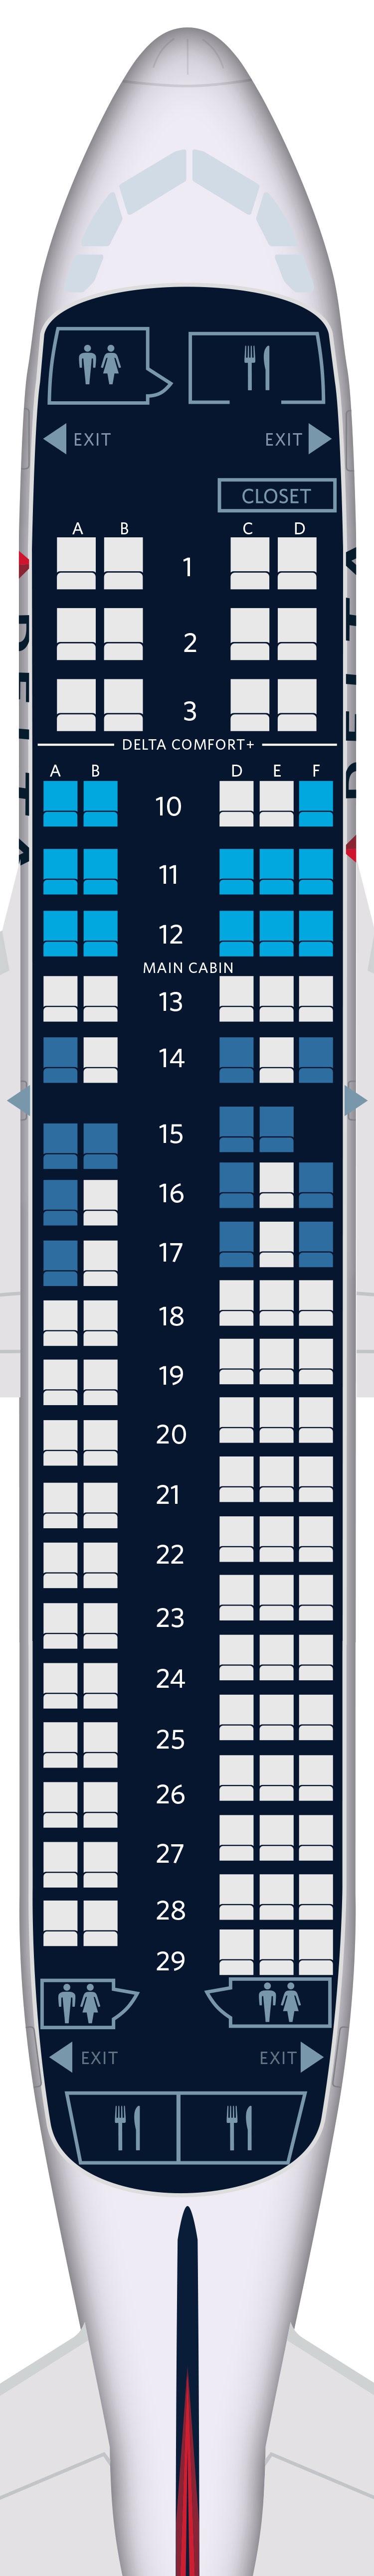 Delta A220 300 Seat Map